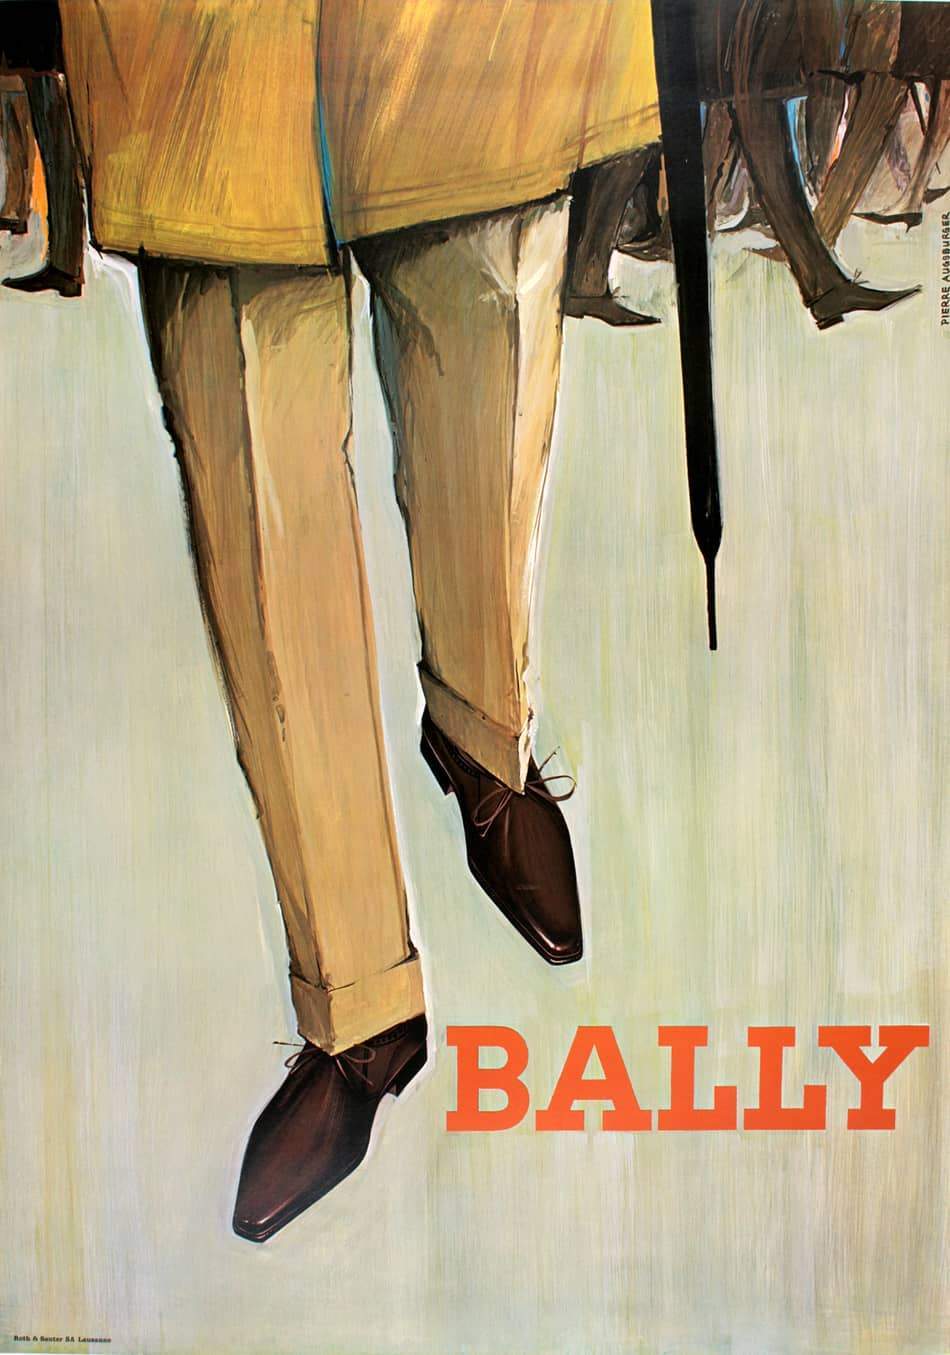 Bally Man With Umbrella Original Poster by Pierre Augsburger 1961